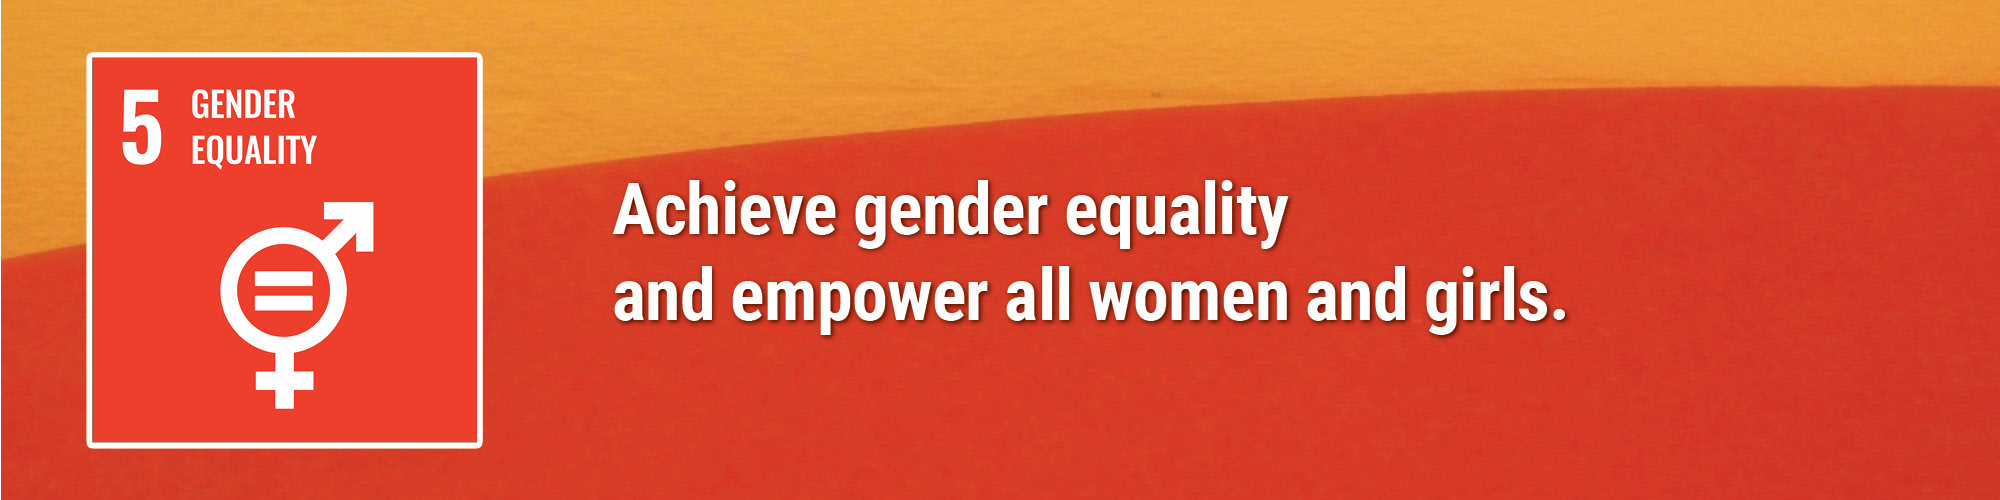 Achieve gender equality and empower all women and girls.